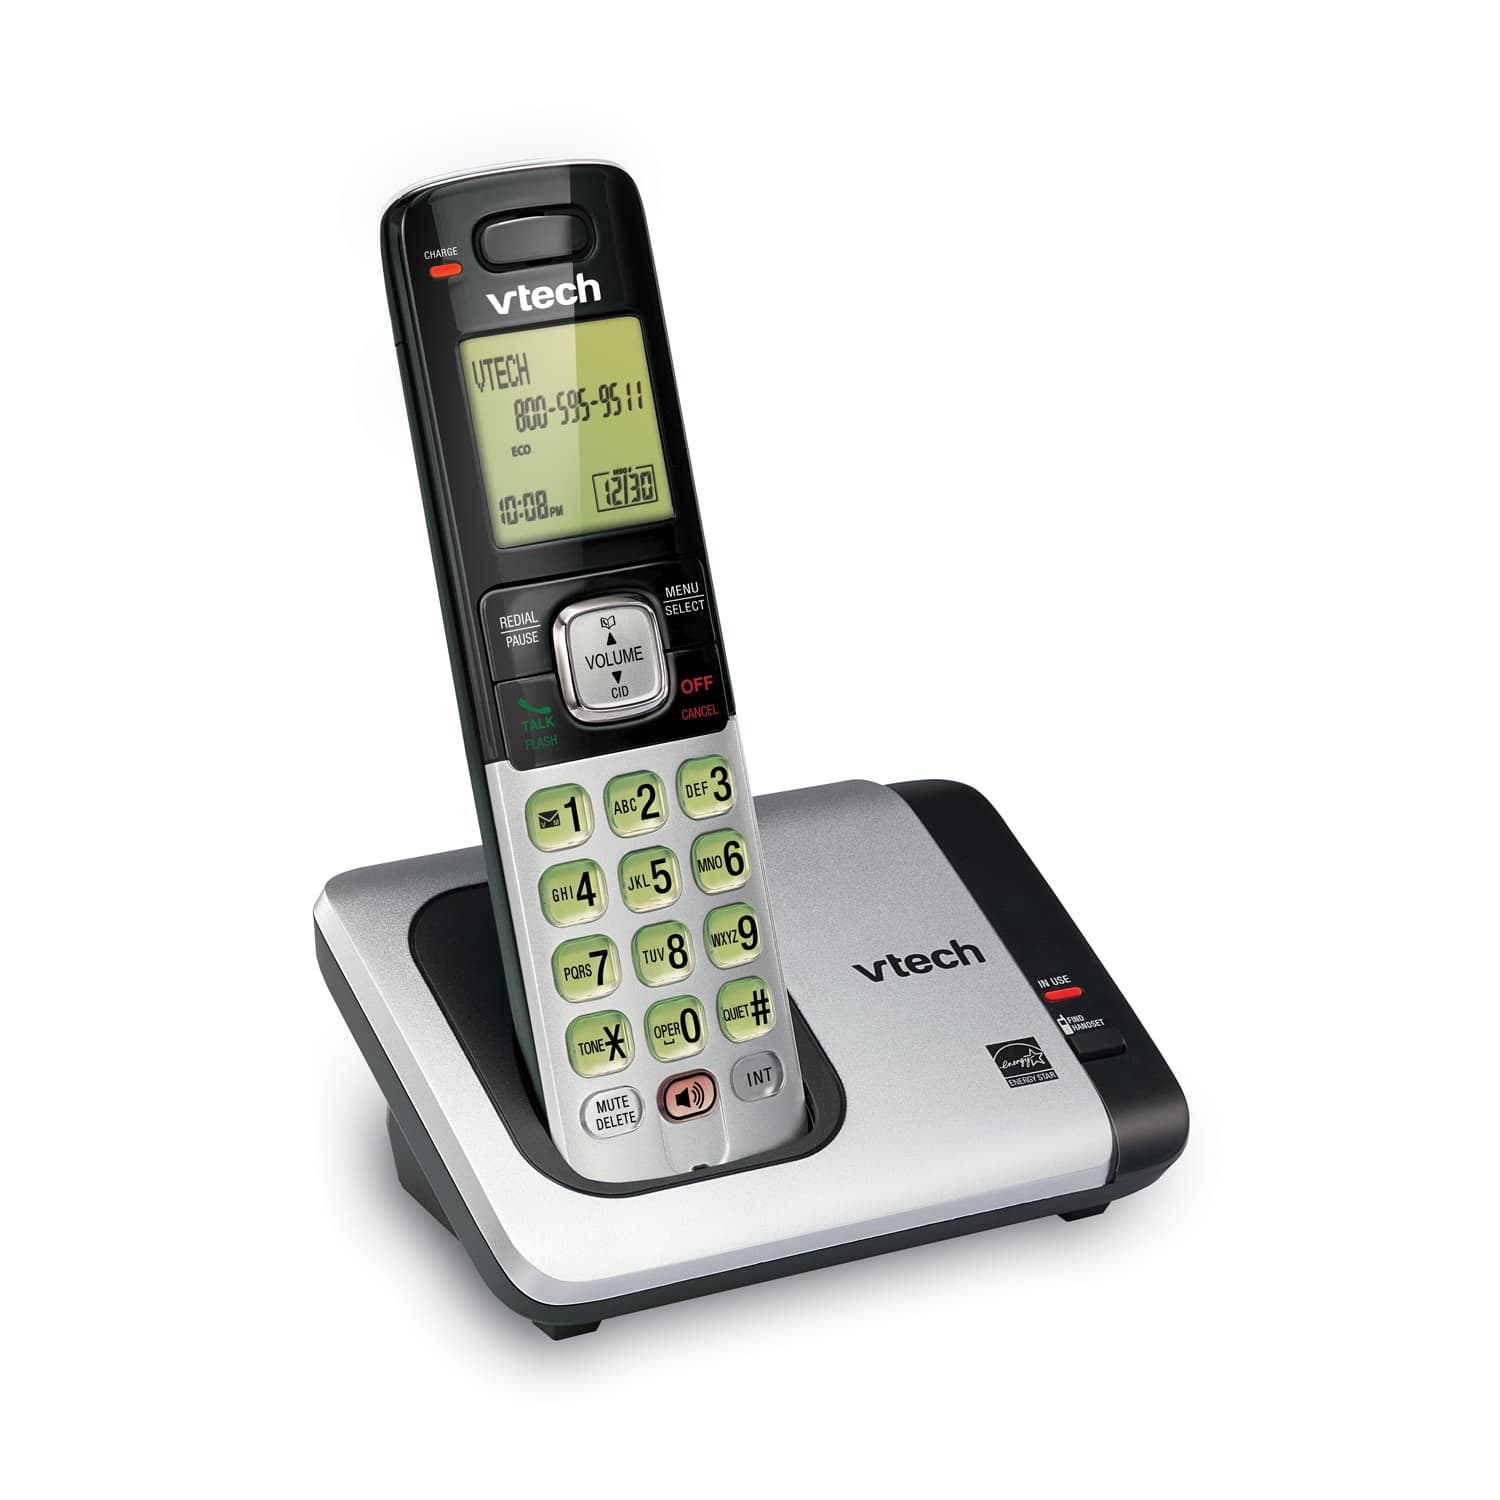 Vtech Cordless Phone with caller id and call waiting. CS6619